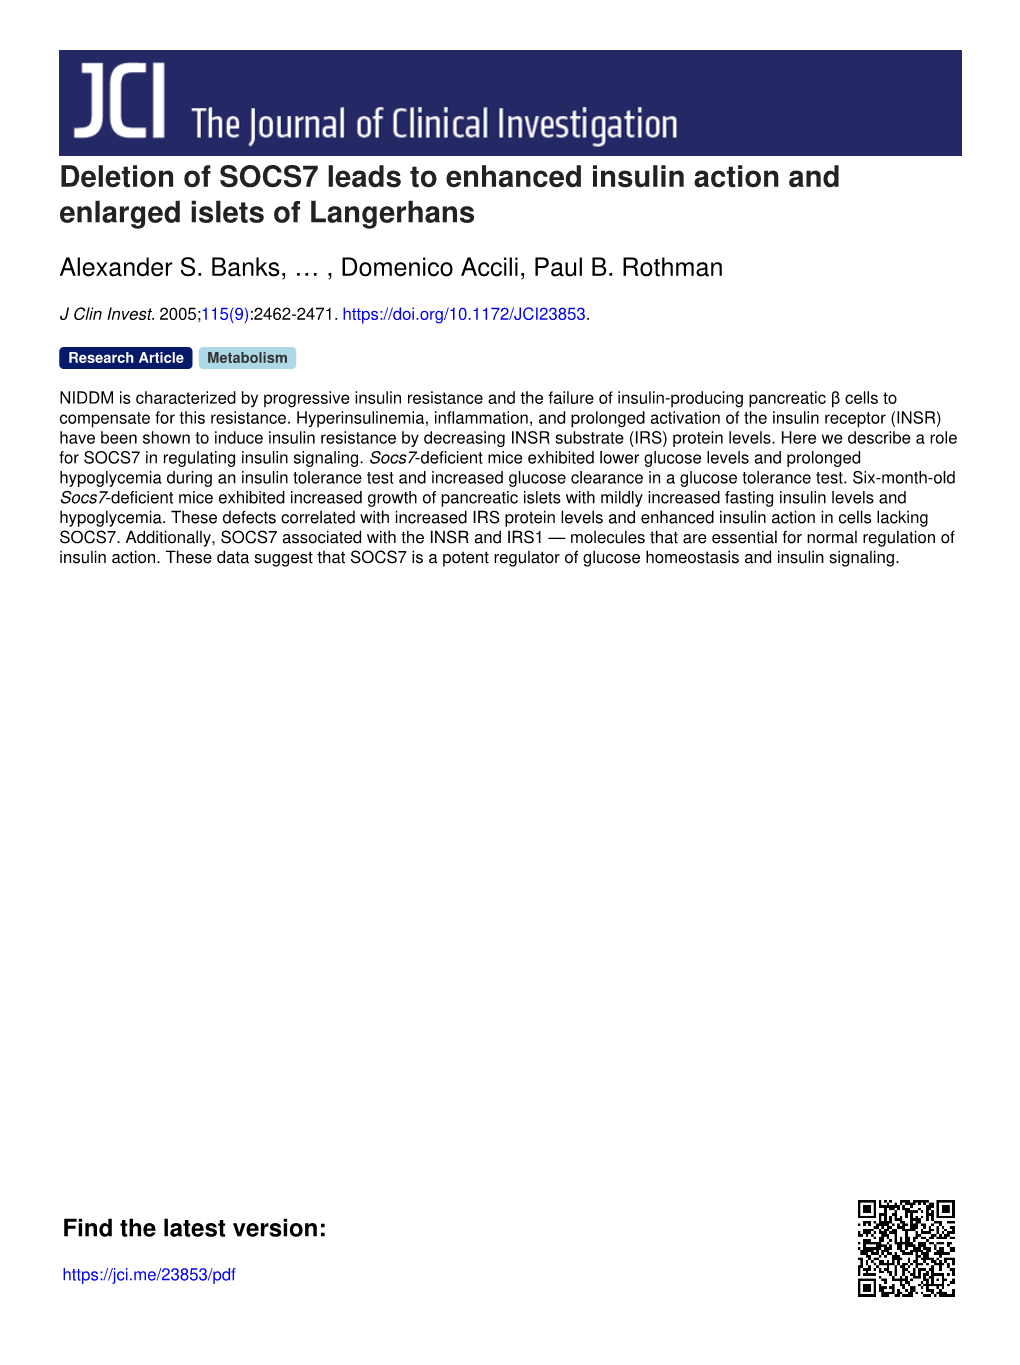 Deletion of SOCS7 Leads to Enhanced Insulin Action and Enlarged Islets of Langerhans